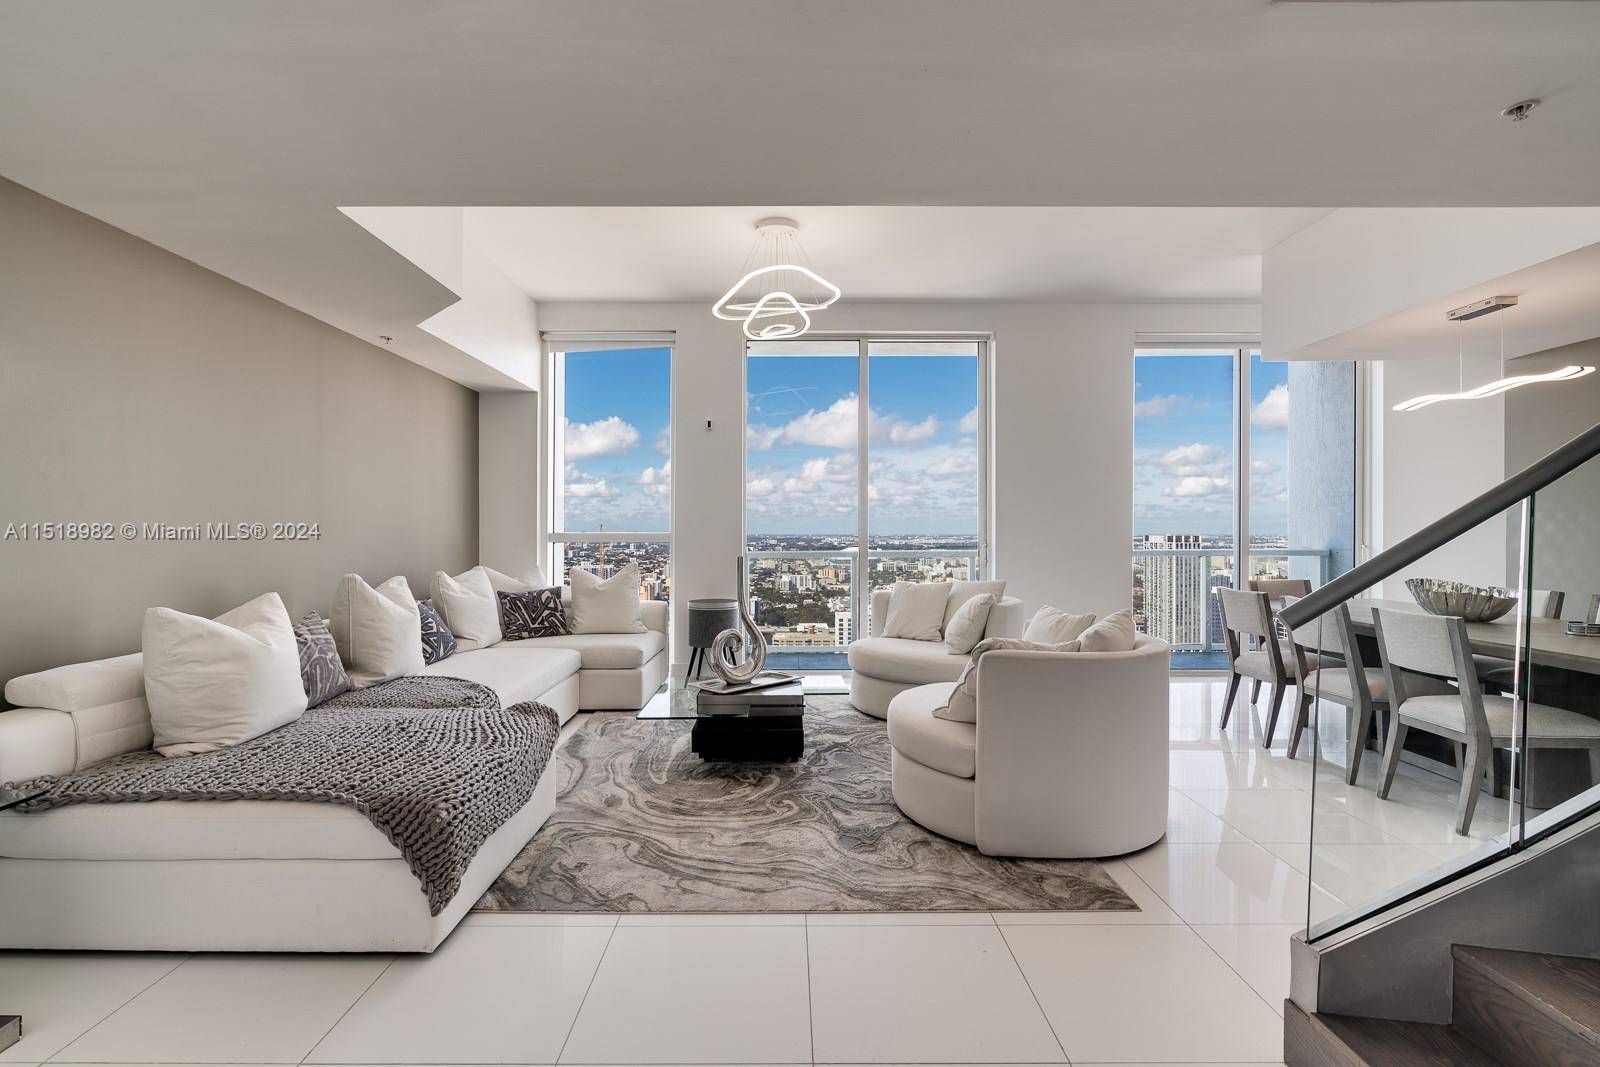 PH4904 boasts over 3000 sqft under AC spread over 3 floors, including a PRIVATE ROOFTOP overlooking the Downtown, Gables Grove skylines.